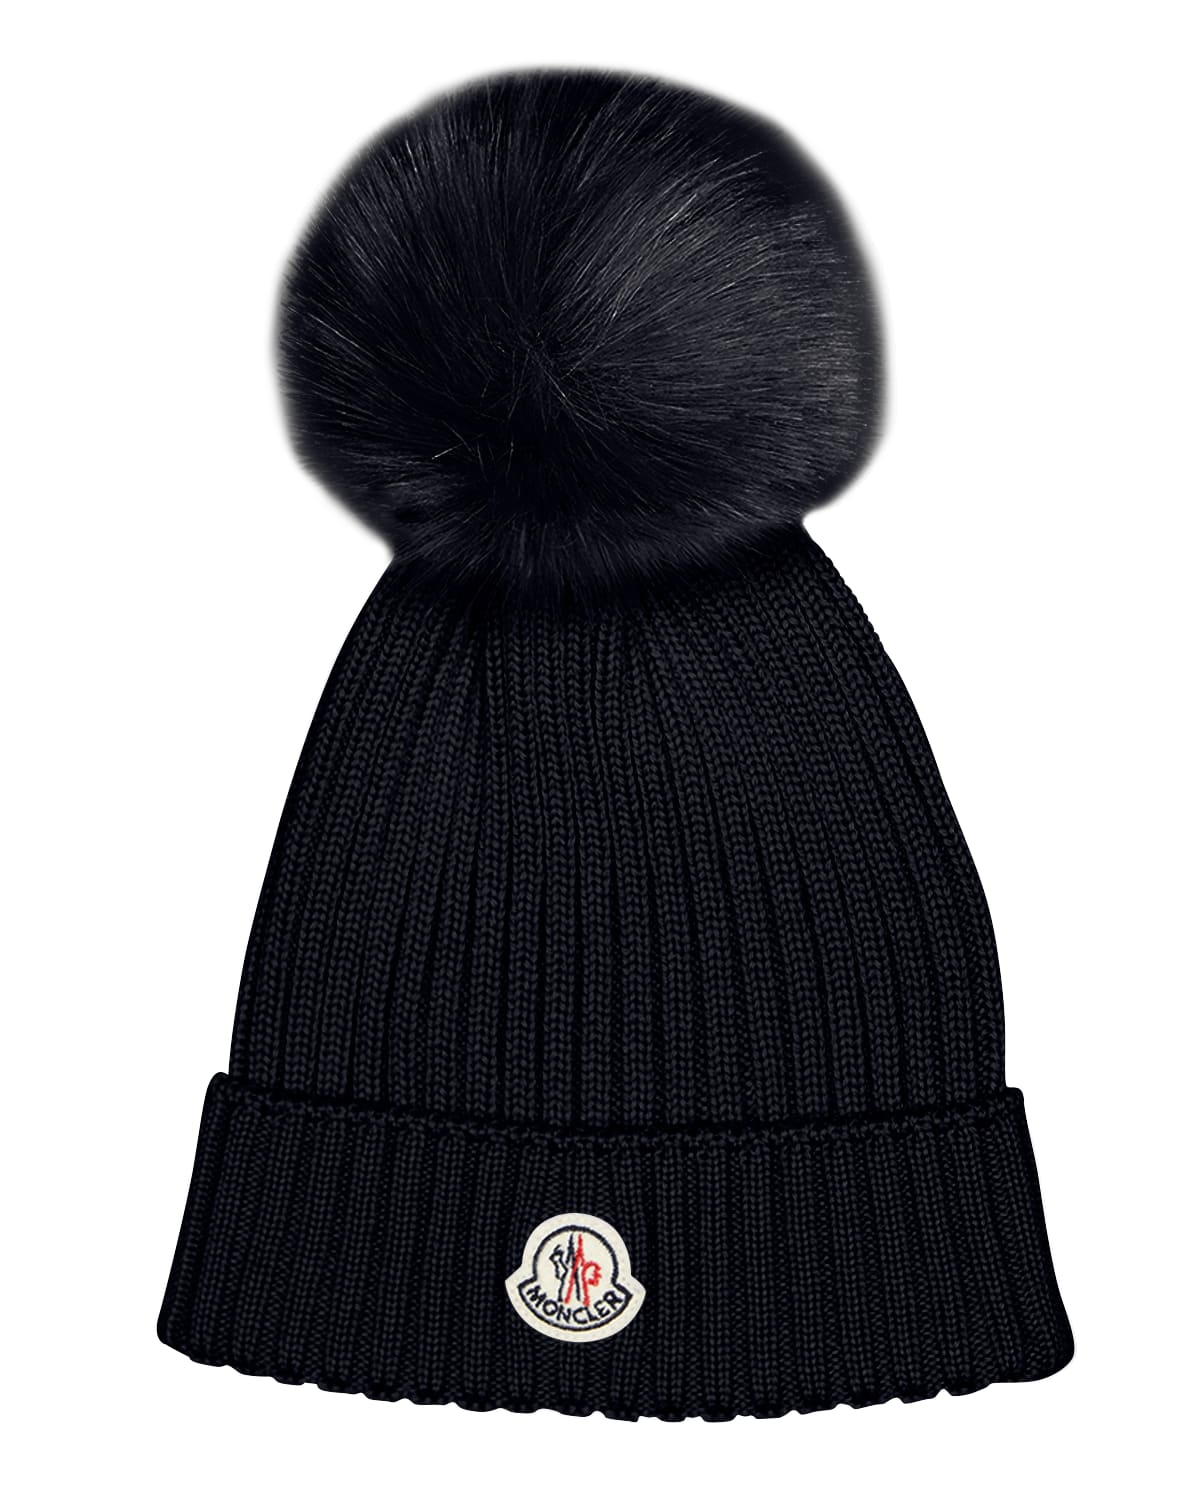 Moncler Kids' Knitted Beanie Navy